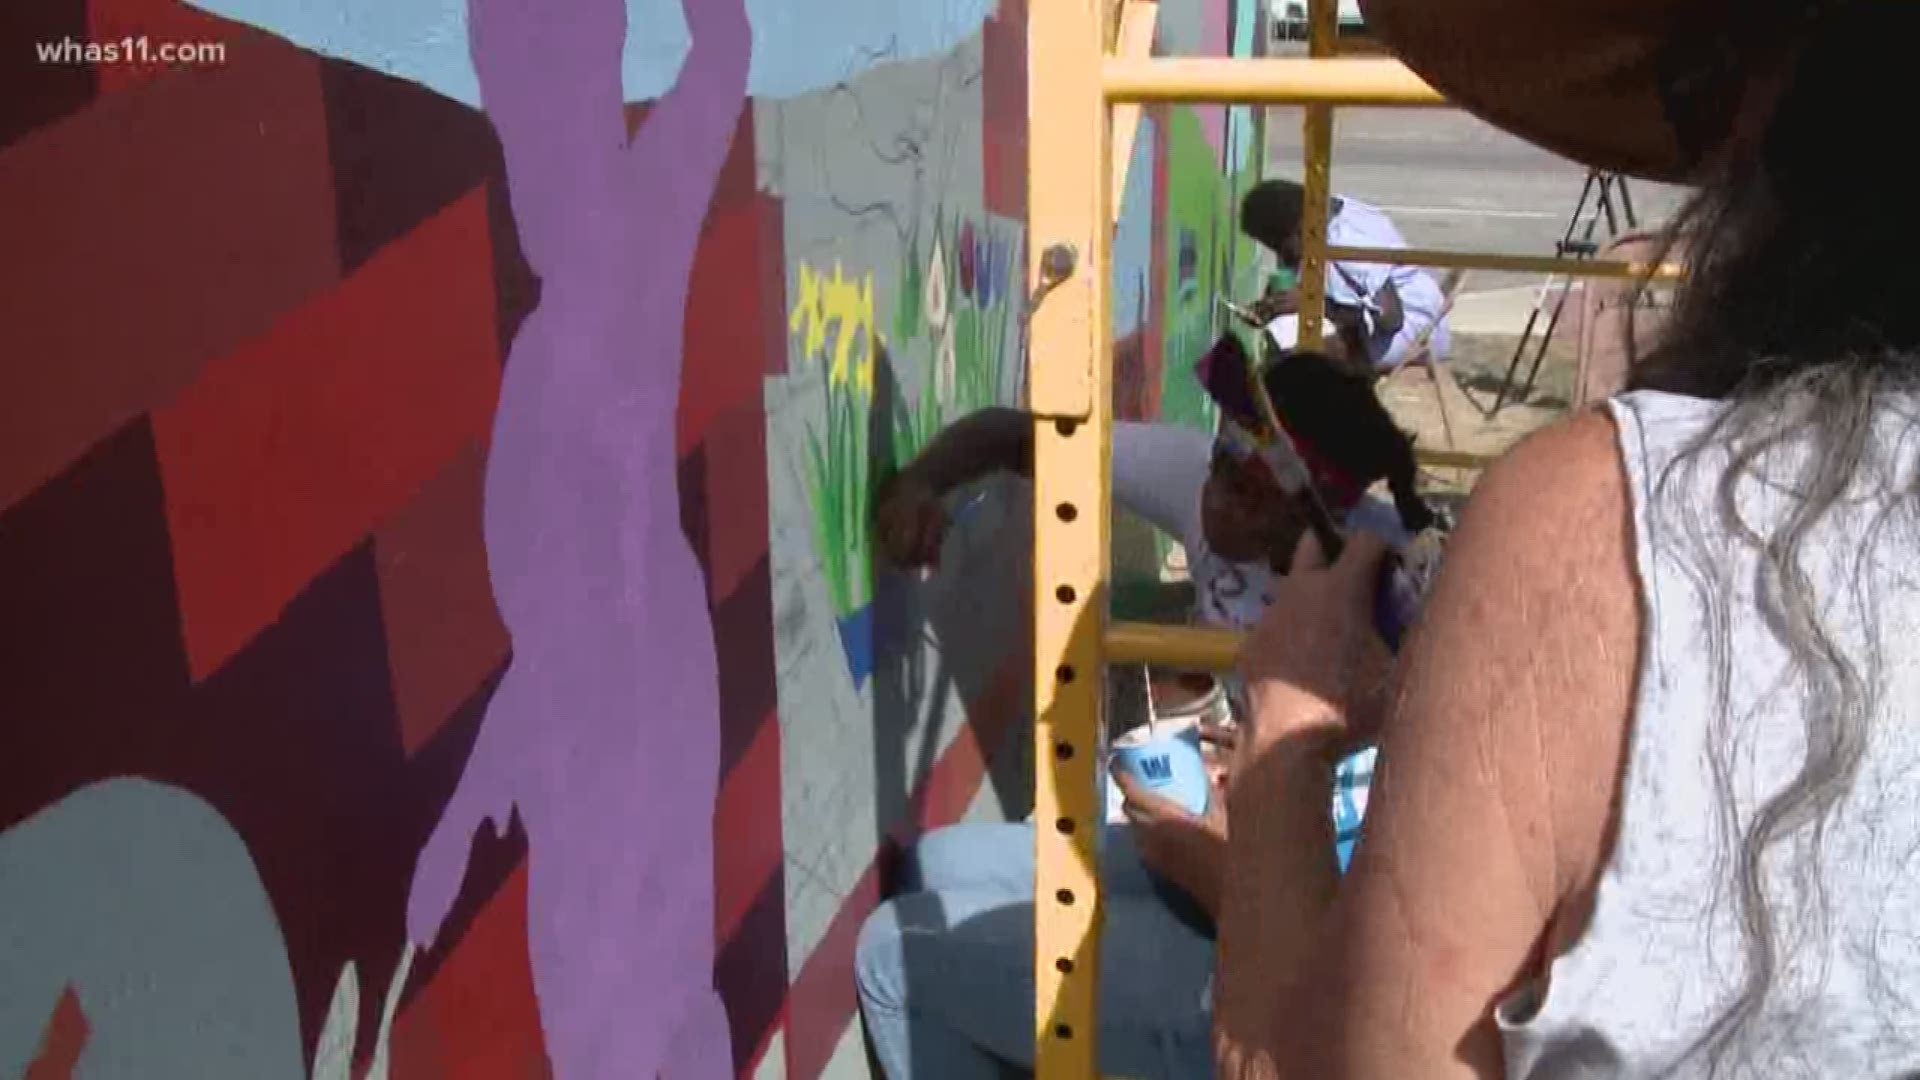 A mural competition is taking place next weekend and a group of teens, spent their Saturday bring theirs to life.